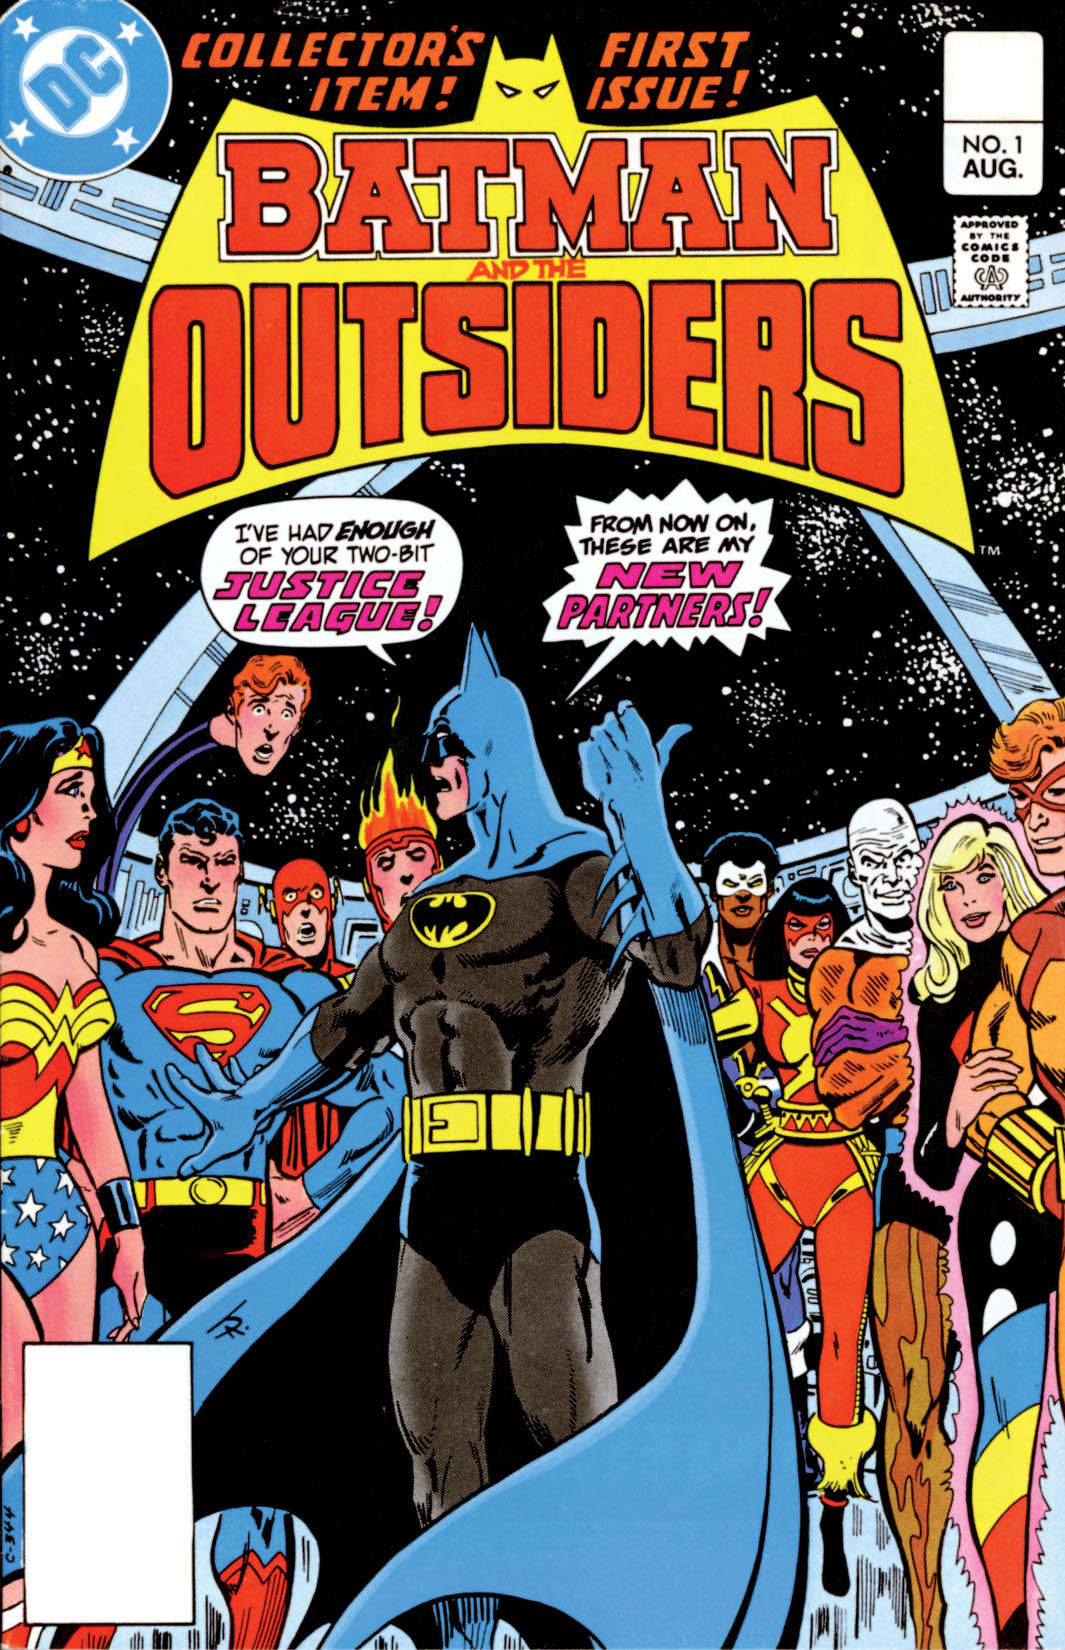 Batman and the Outsiders (1983-) #1 preview images